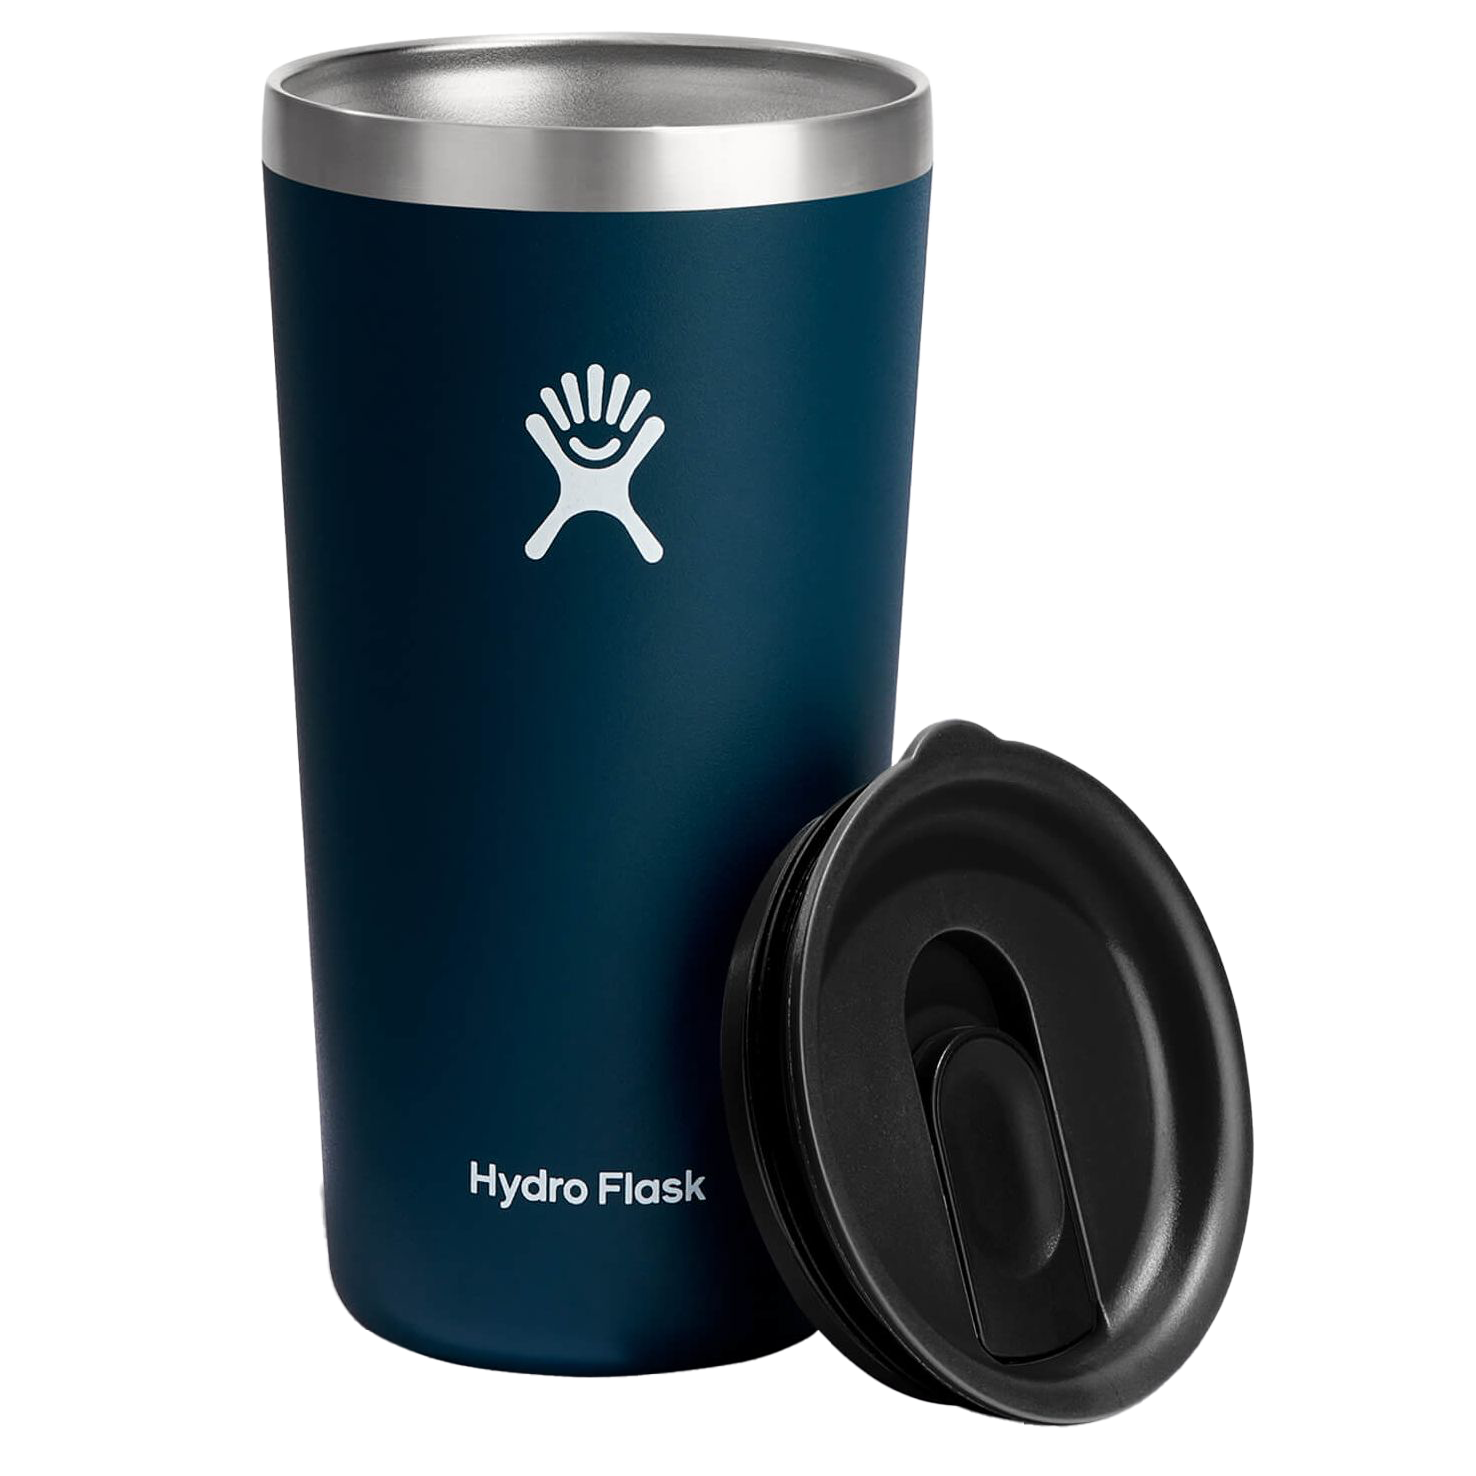 Hydro Flask All Around Tumbler 12 oz Stainless Steel Insulated Travel Mug  Blue